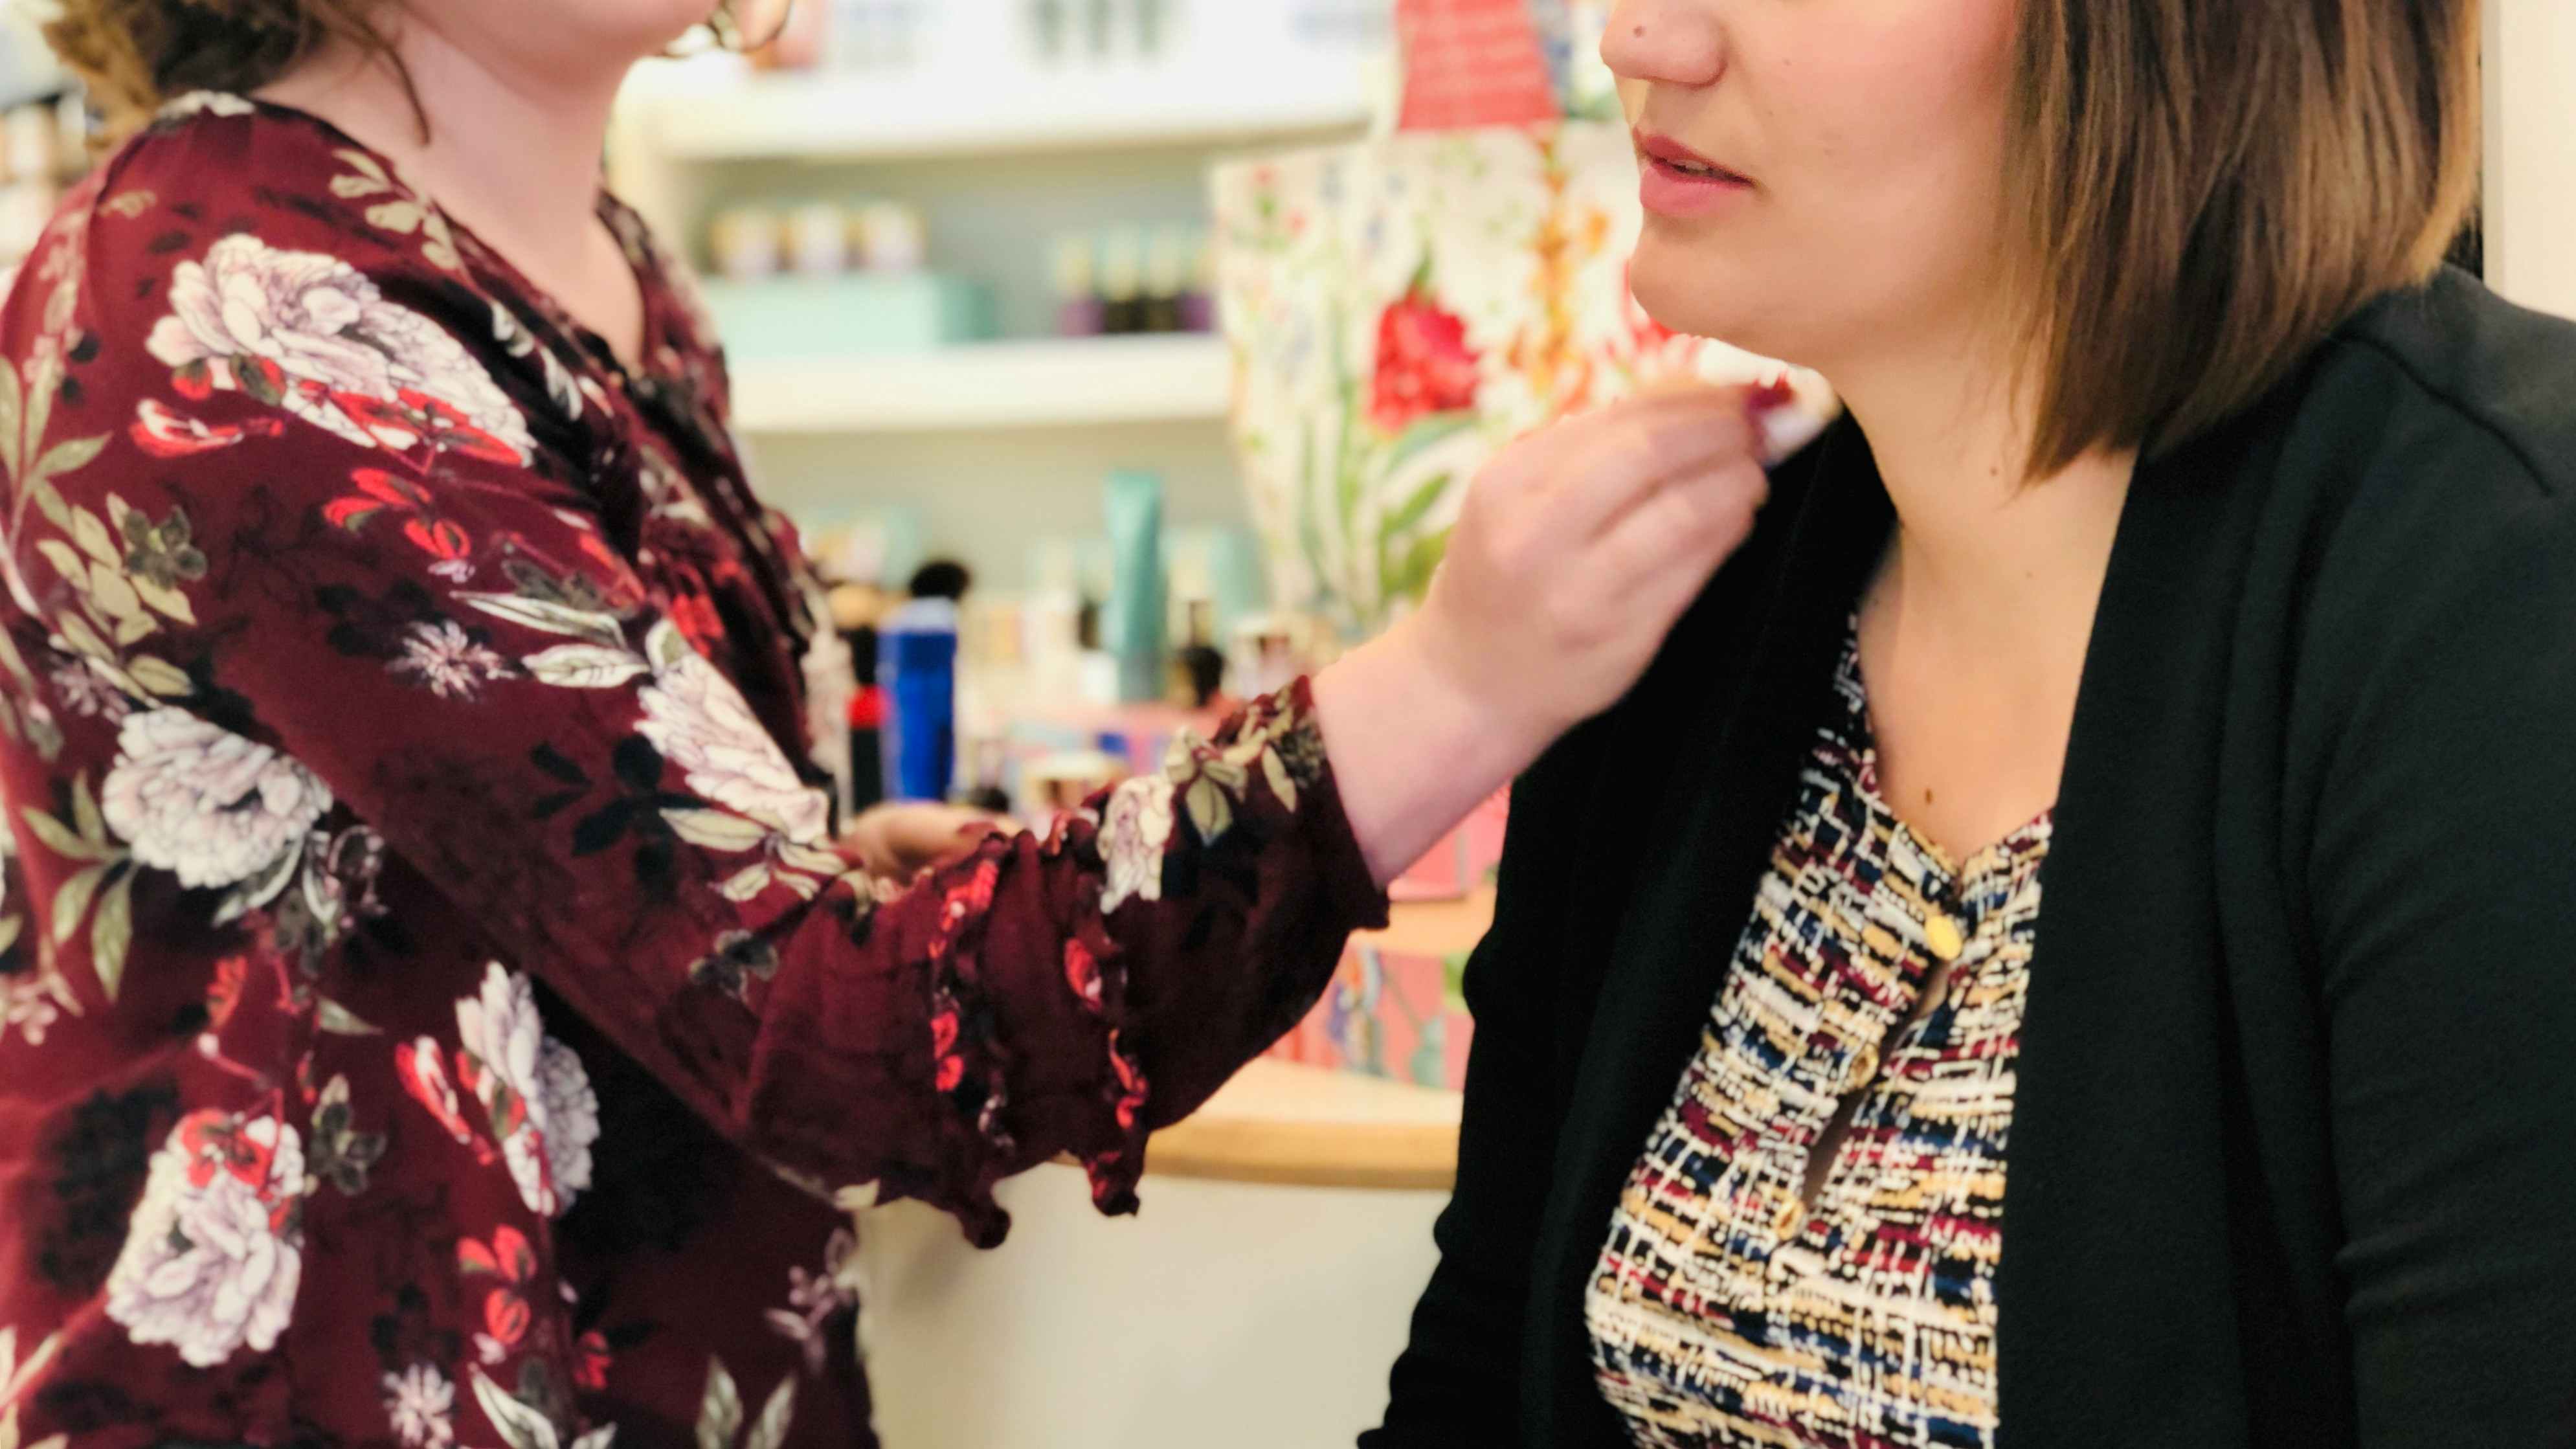 Get free makeovers and skincare lessons at Macy's.